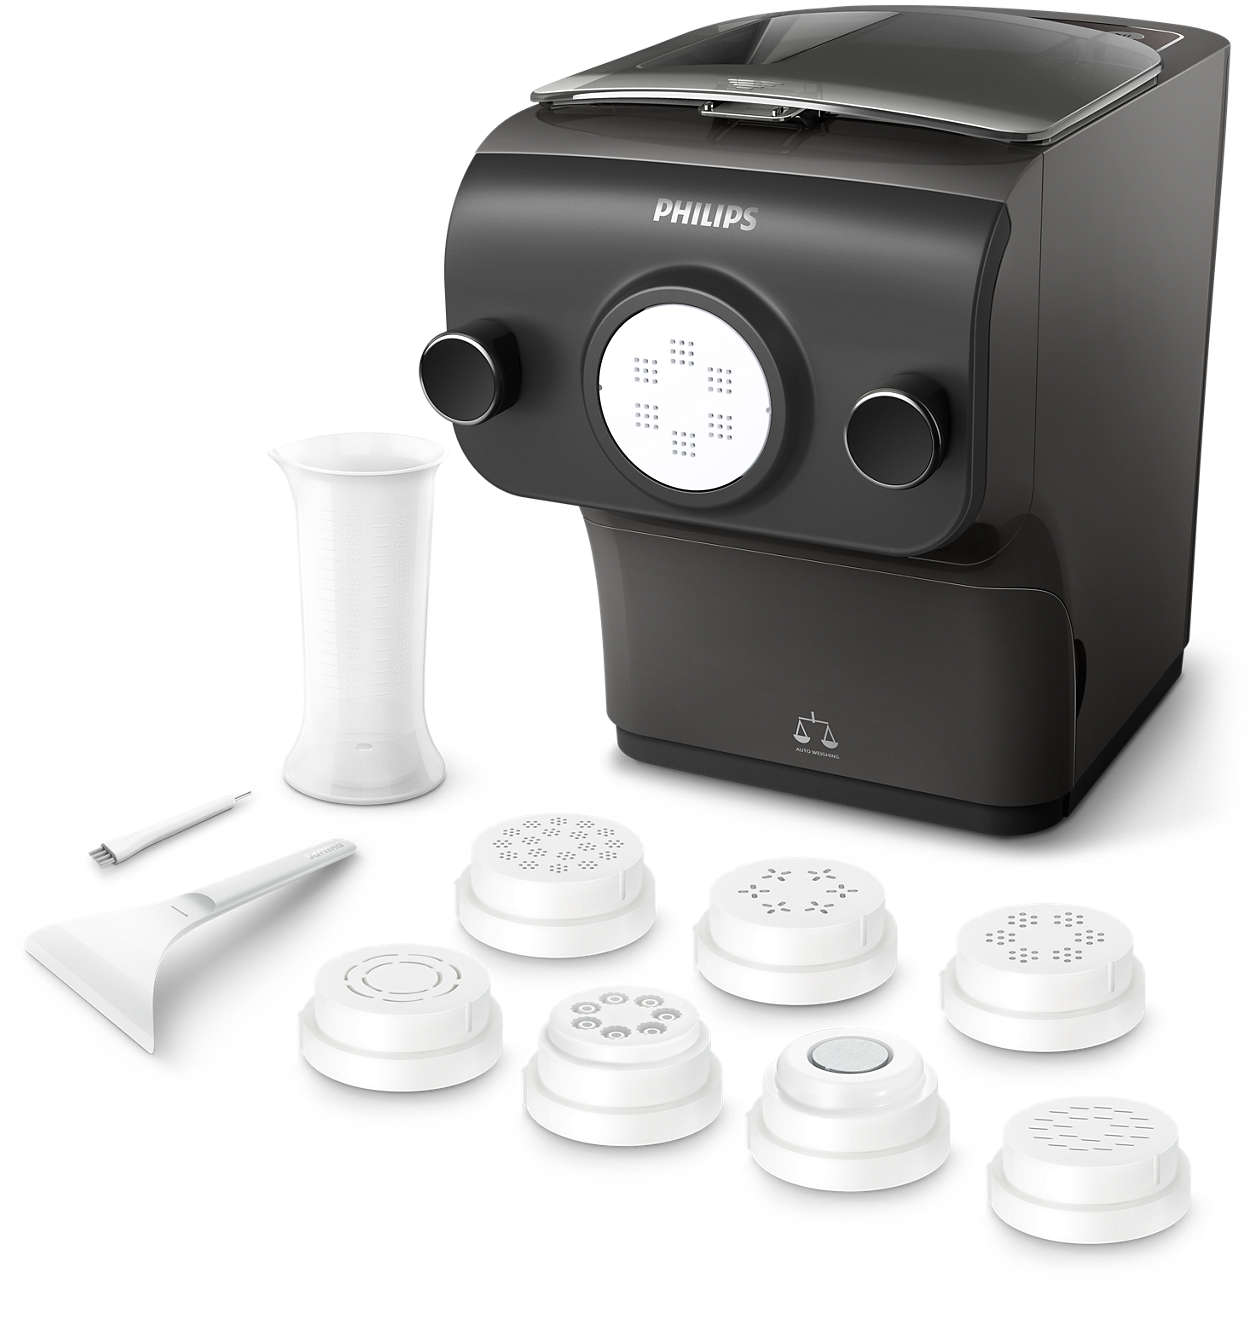 Starter Kit N° 1003 per Philips Pastamaker Avance Collection - CAPO12 -  Trafile e Pasta 100% MADE IN ITALY